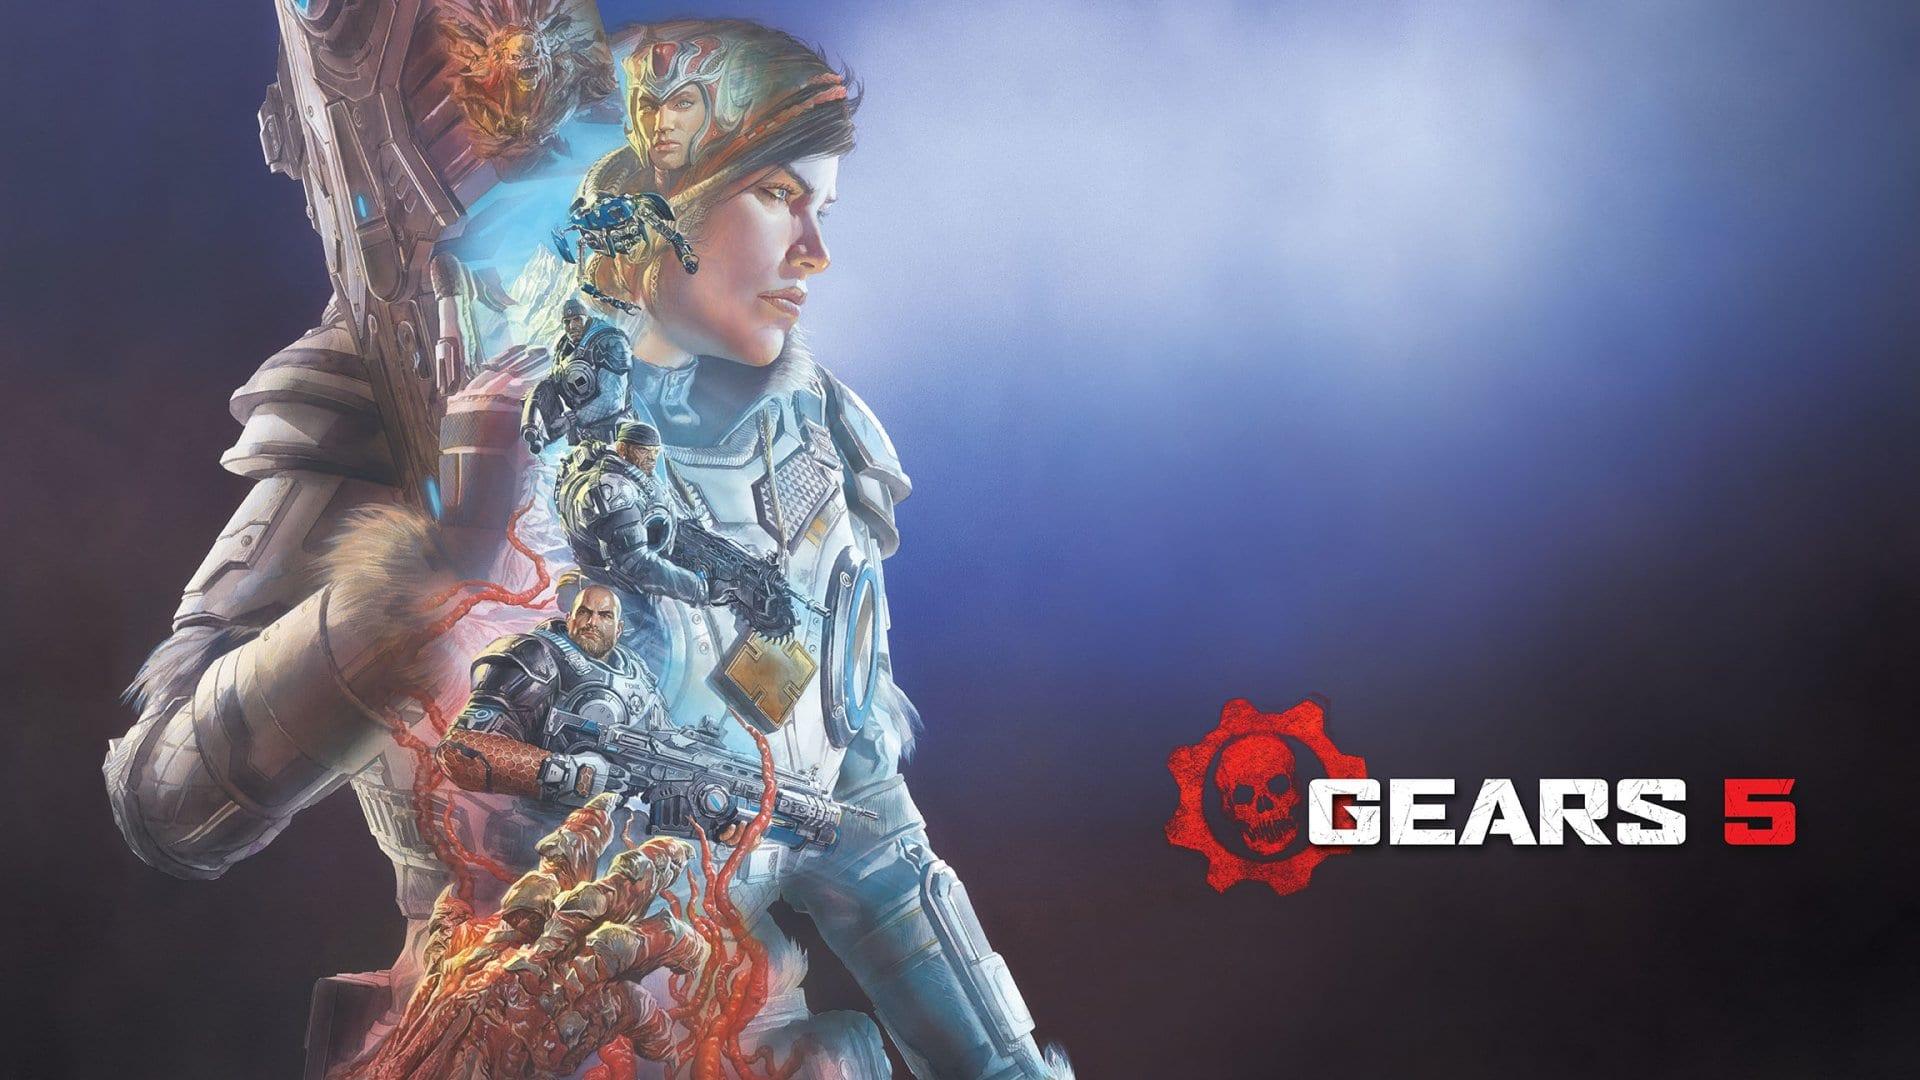 4K & HD Gears 5 Wallpaper You Need to Make Your Next Desktop